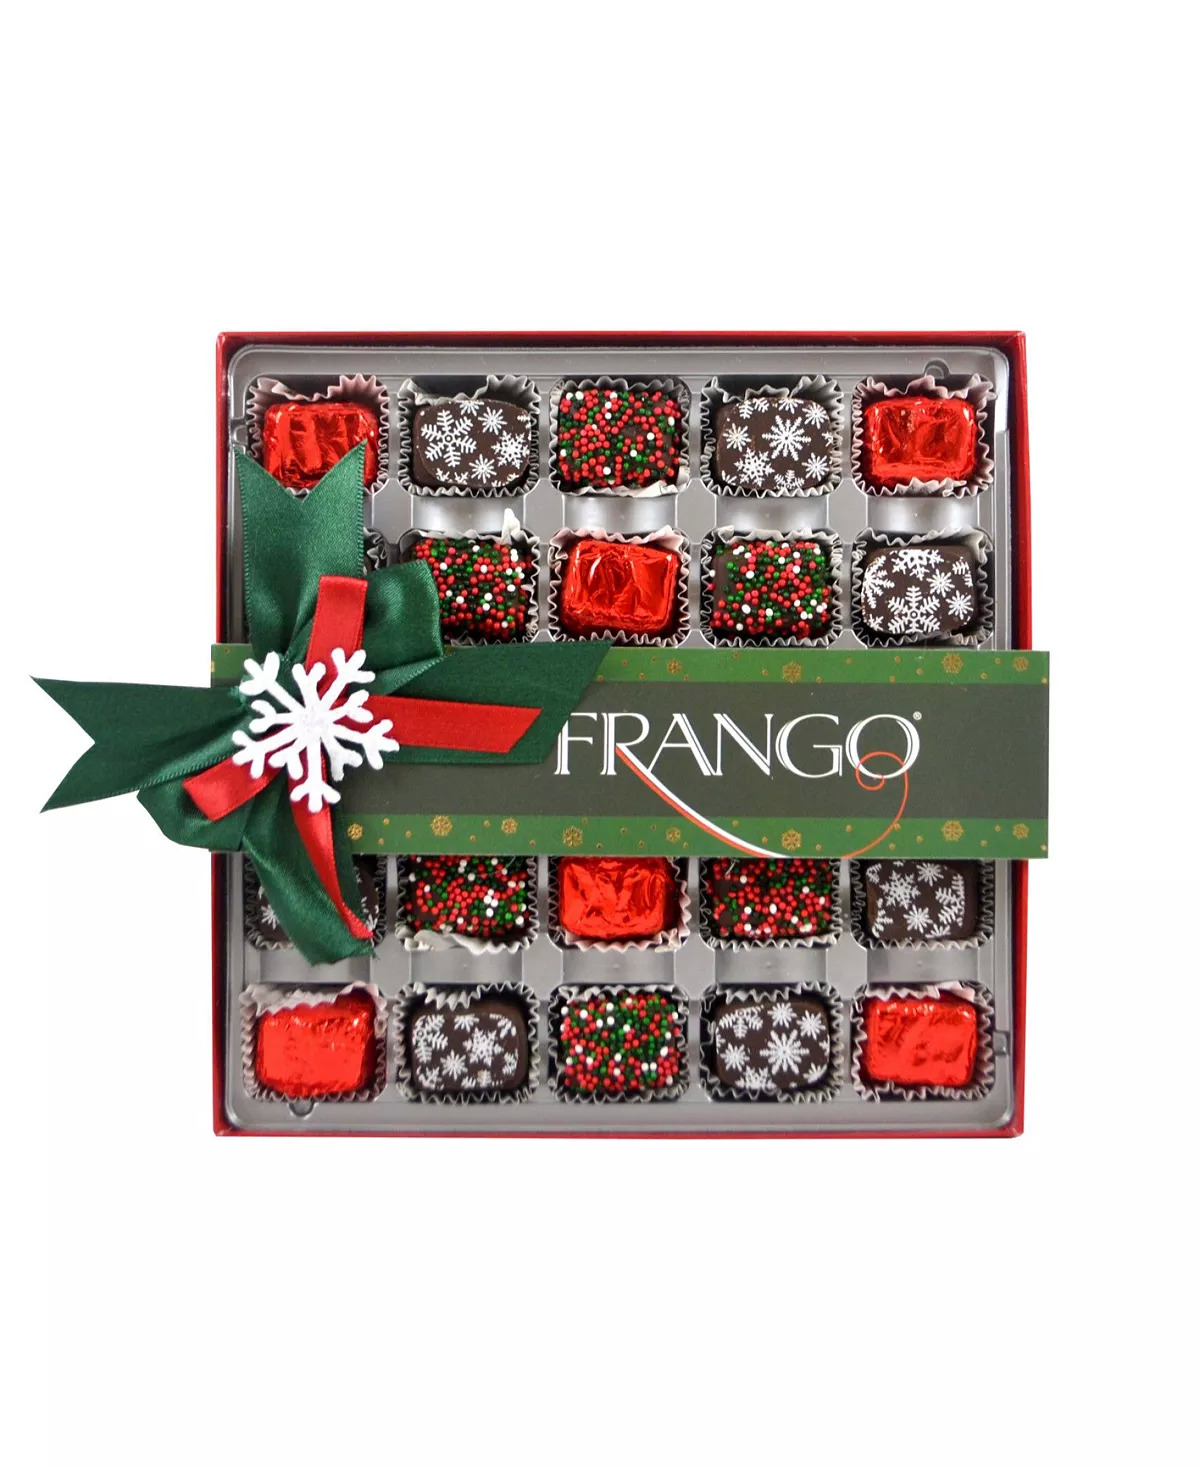 R.H. Macy & Co Holiday Dark Chocolate Sea Salt Caramels $10, Frango Holiday Decorated Dark Mint Chocolates $12 & More + Free Store Pickup at Macy's or F/S on Orders $25+